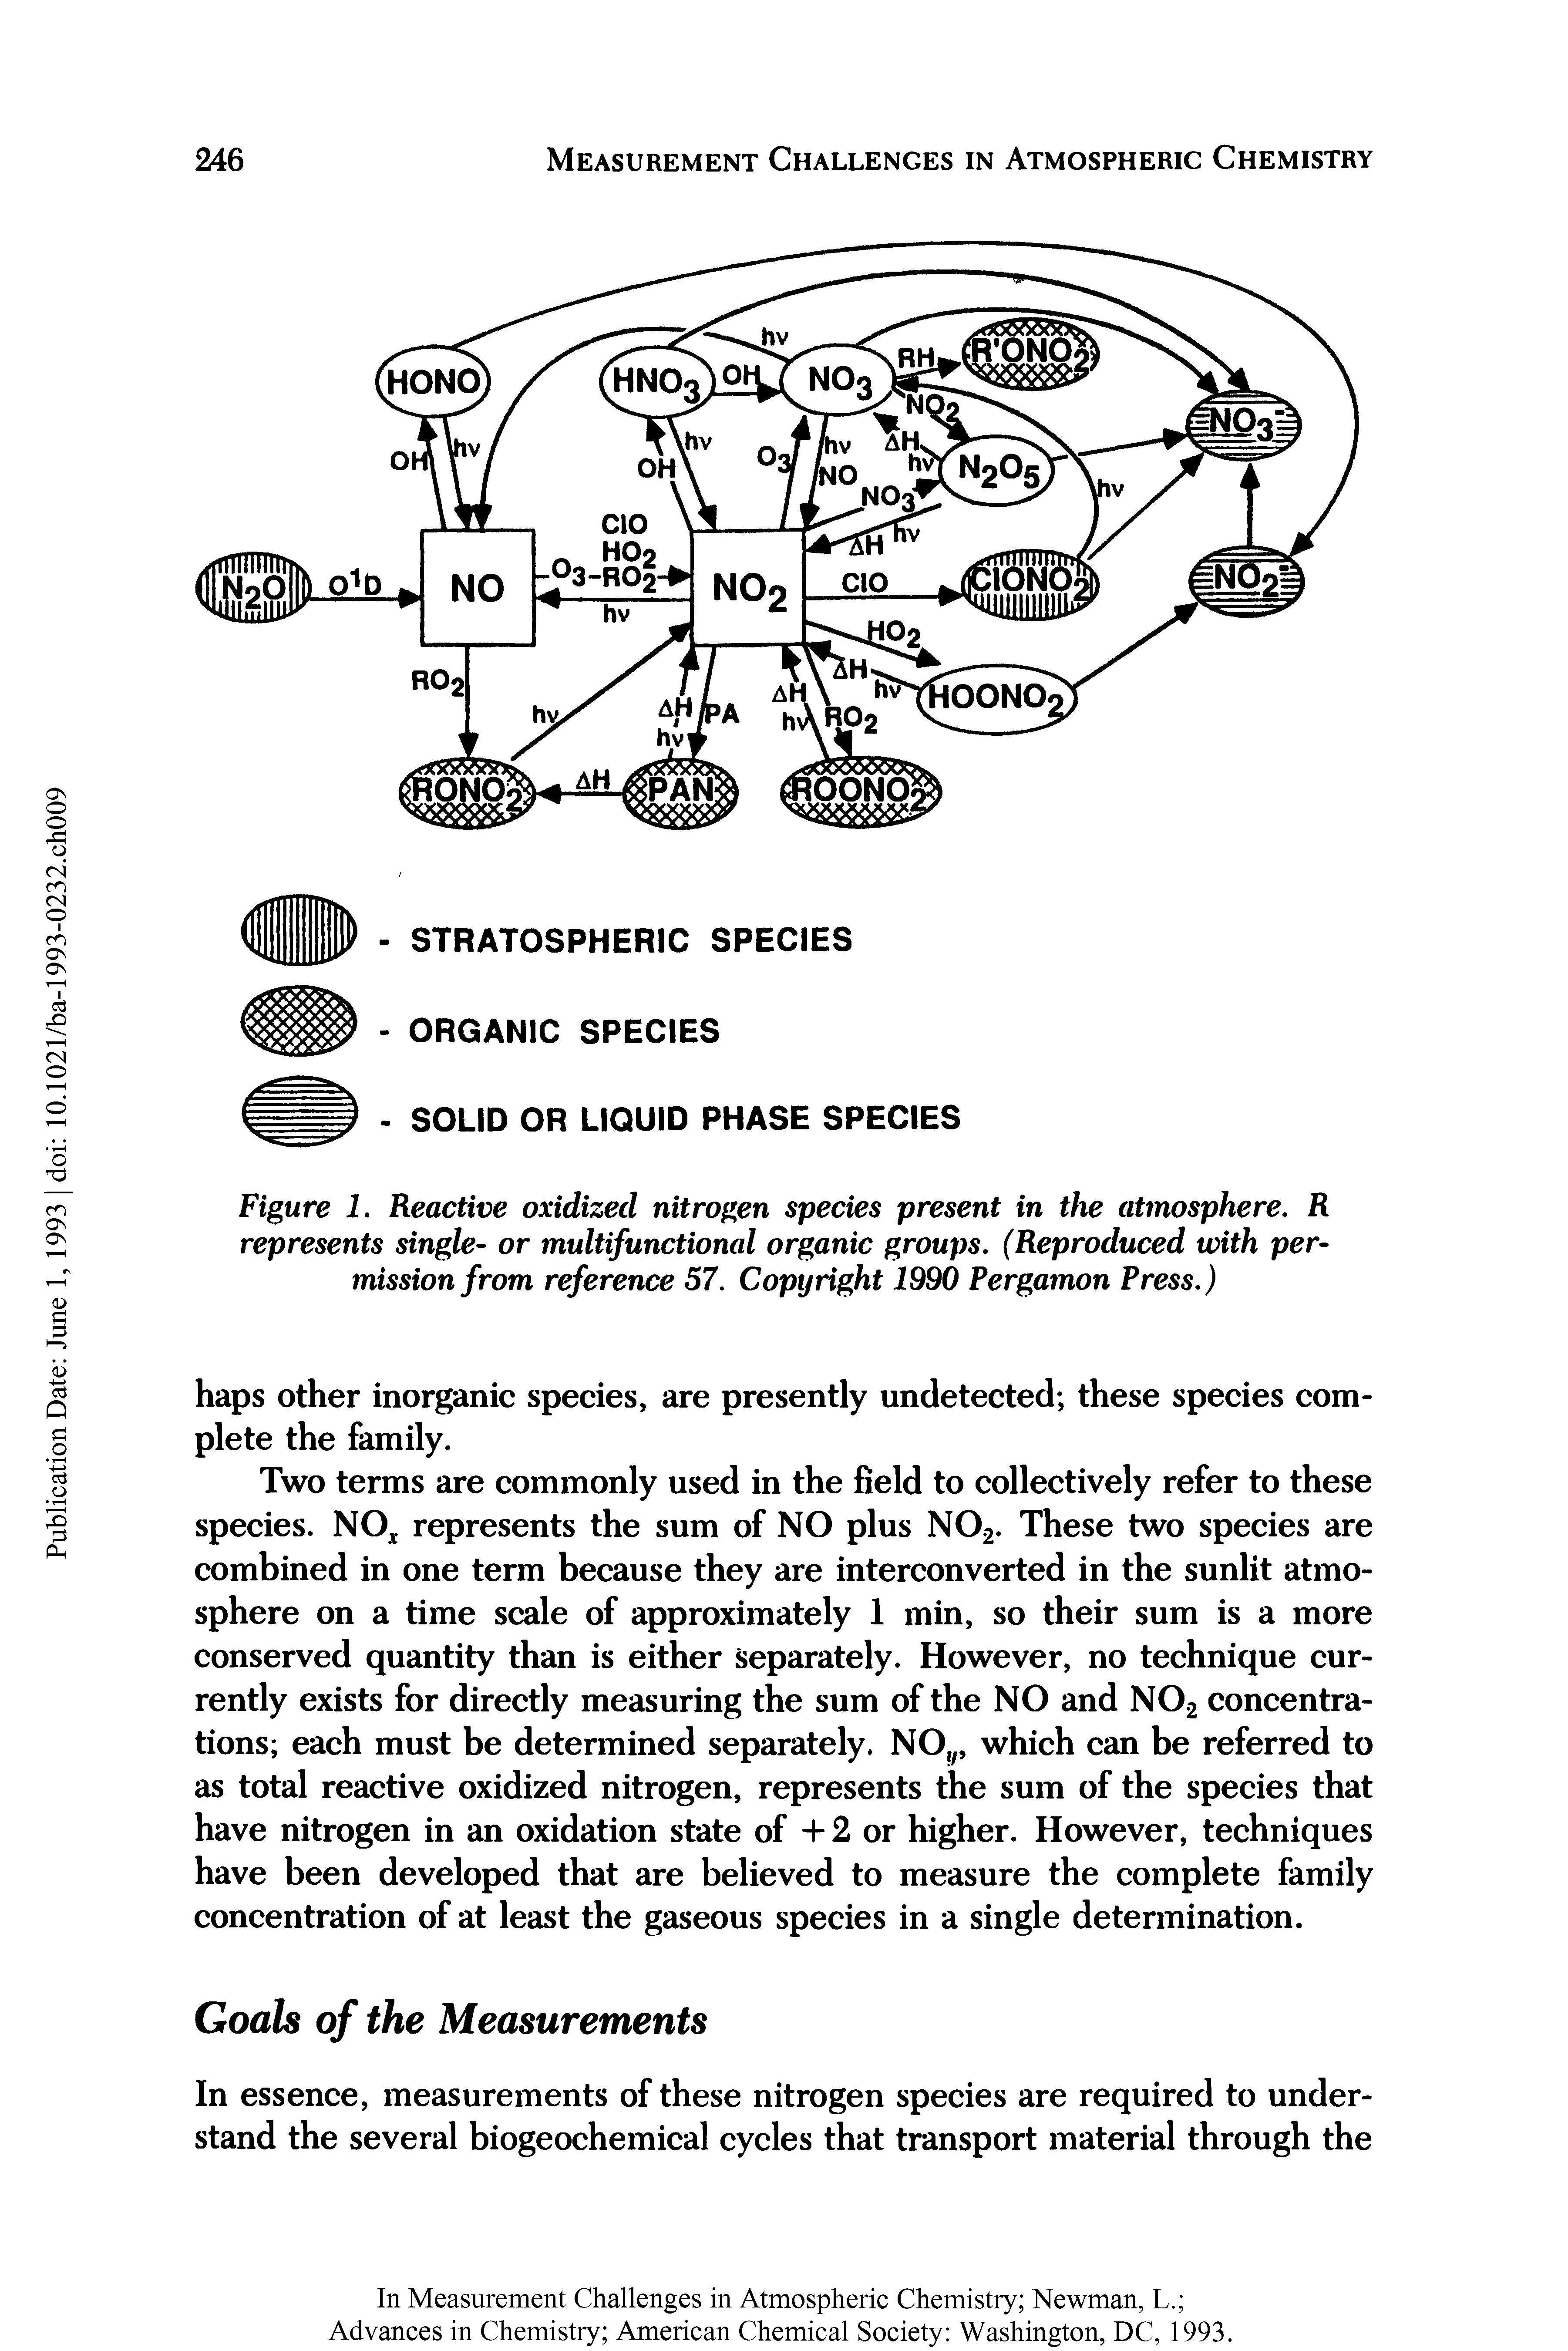 Figure 1. Reactive oxidized nitrogen species present in the atmosphere. R represents single- or multifunctional organic groups. (Reproduced with permission from reference 57. Copyright 1990 Pergamon Press.)...